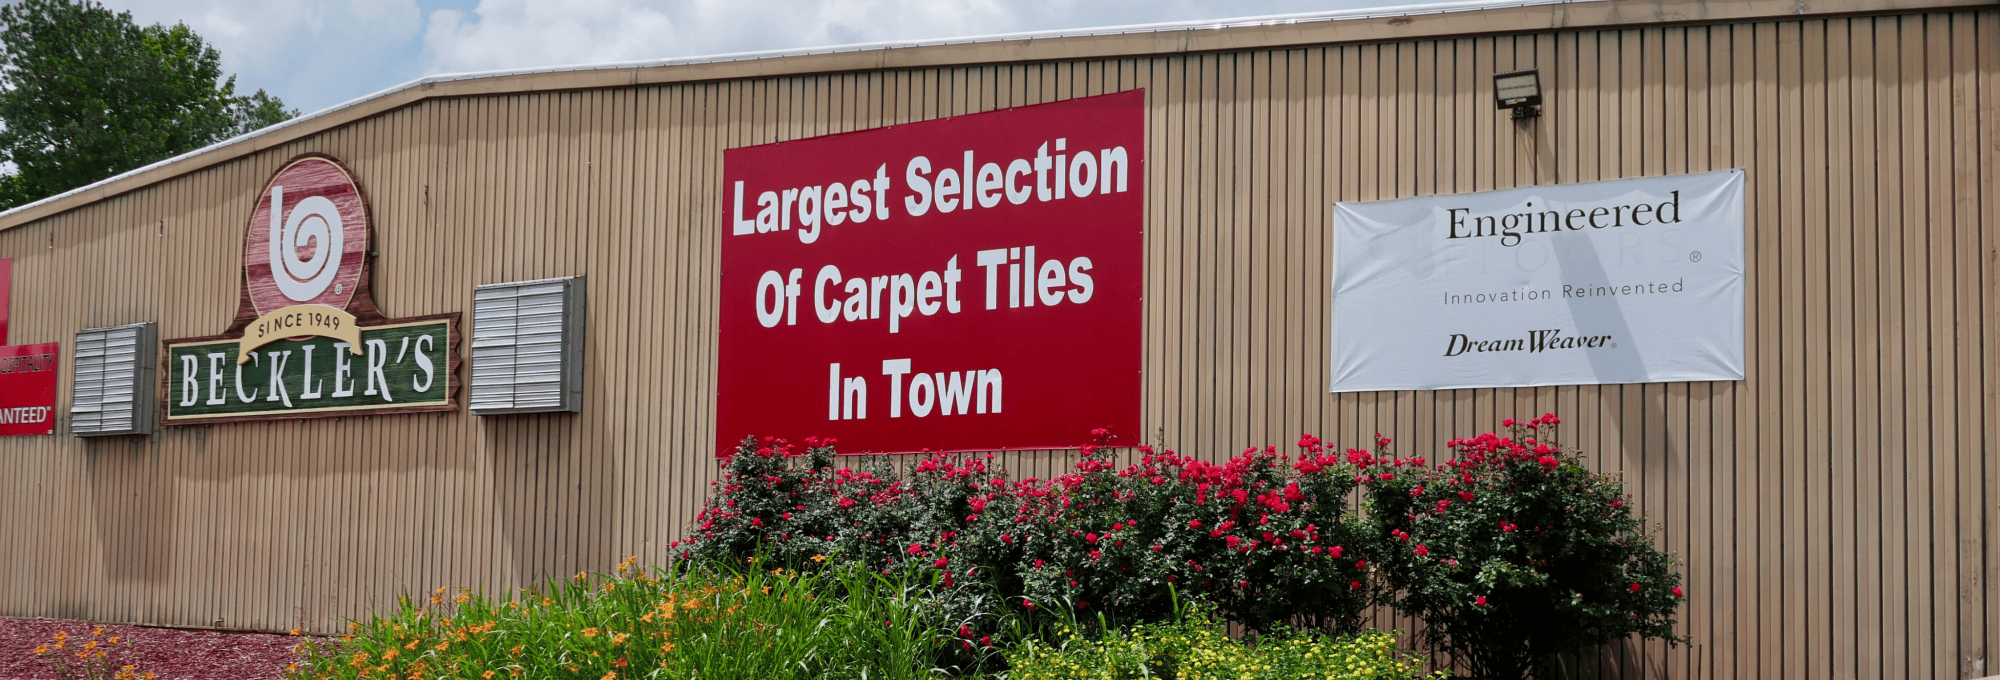 Beckler's Flooring Center has the largest selection of carpet tiles in the Dalton, GA area.